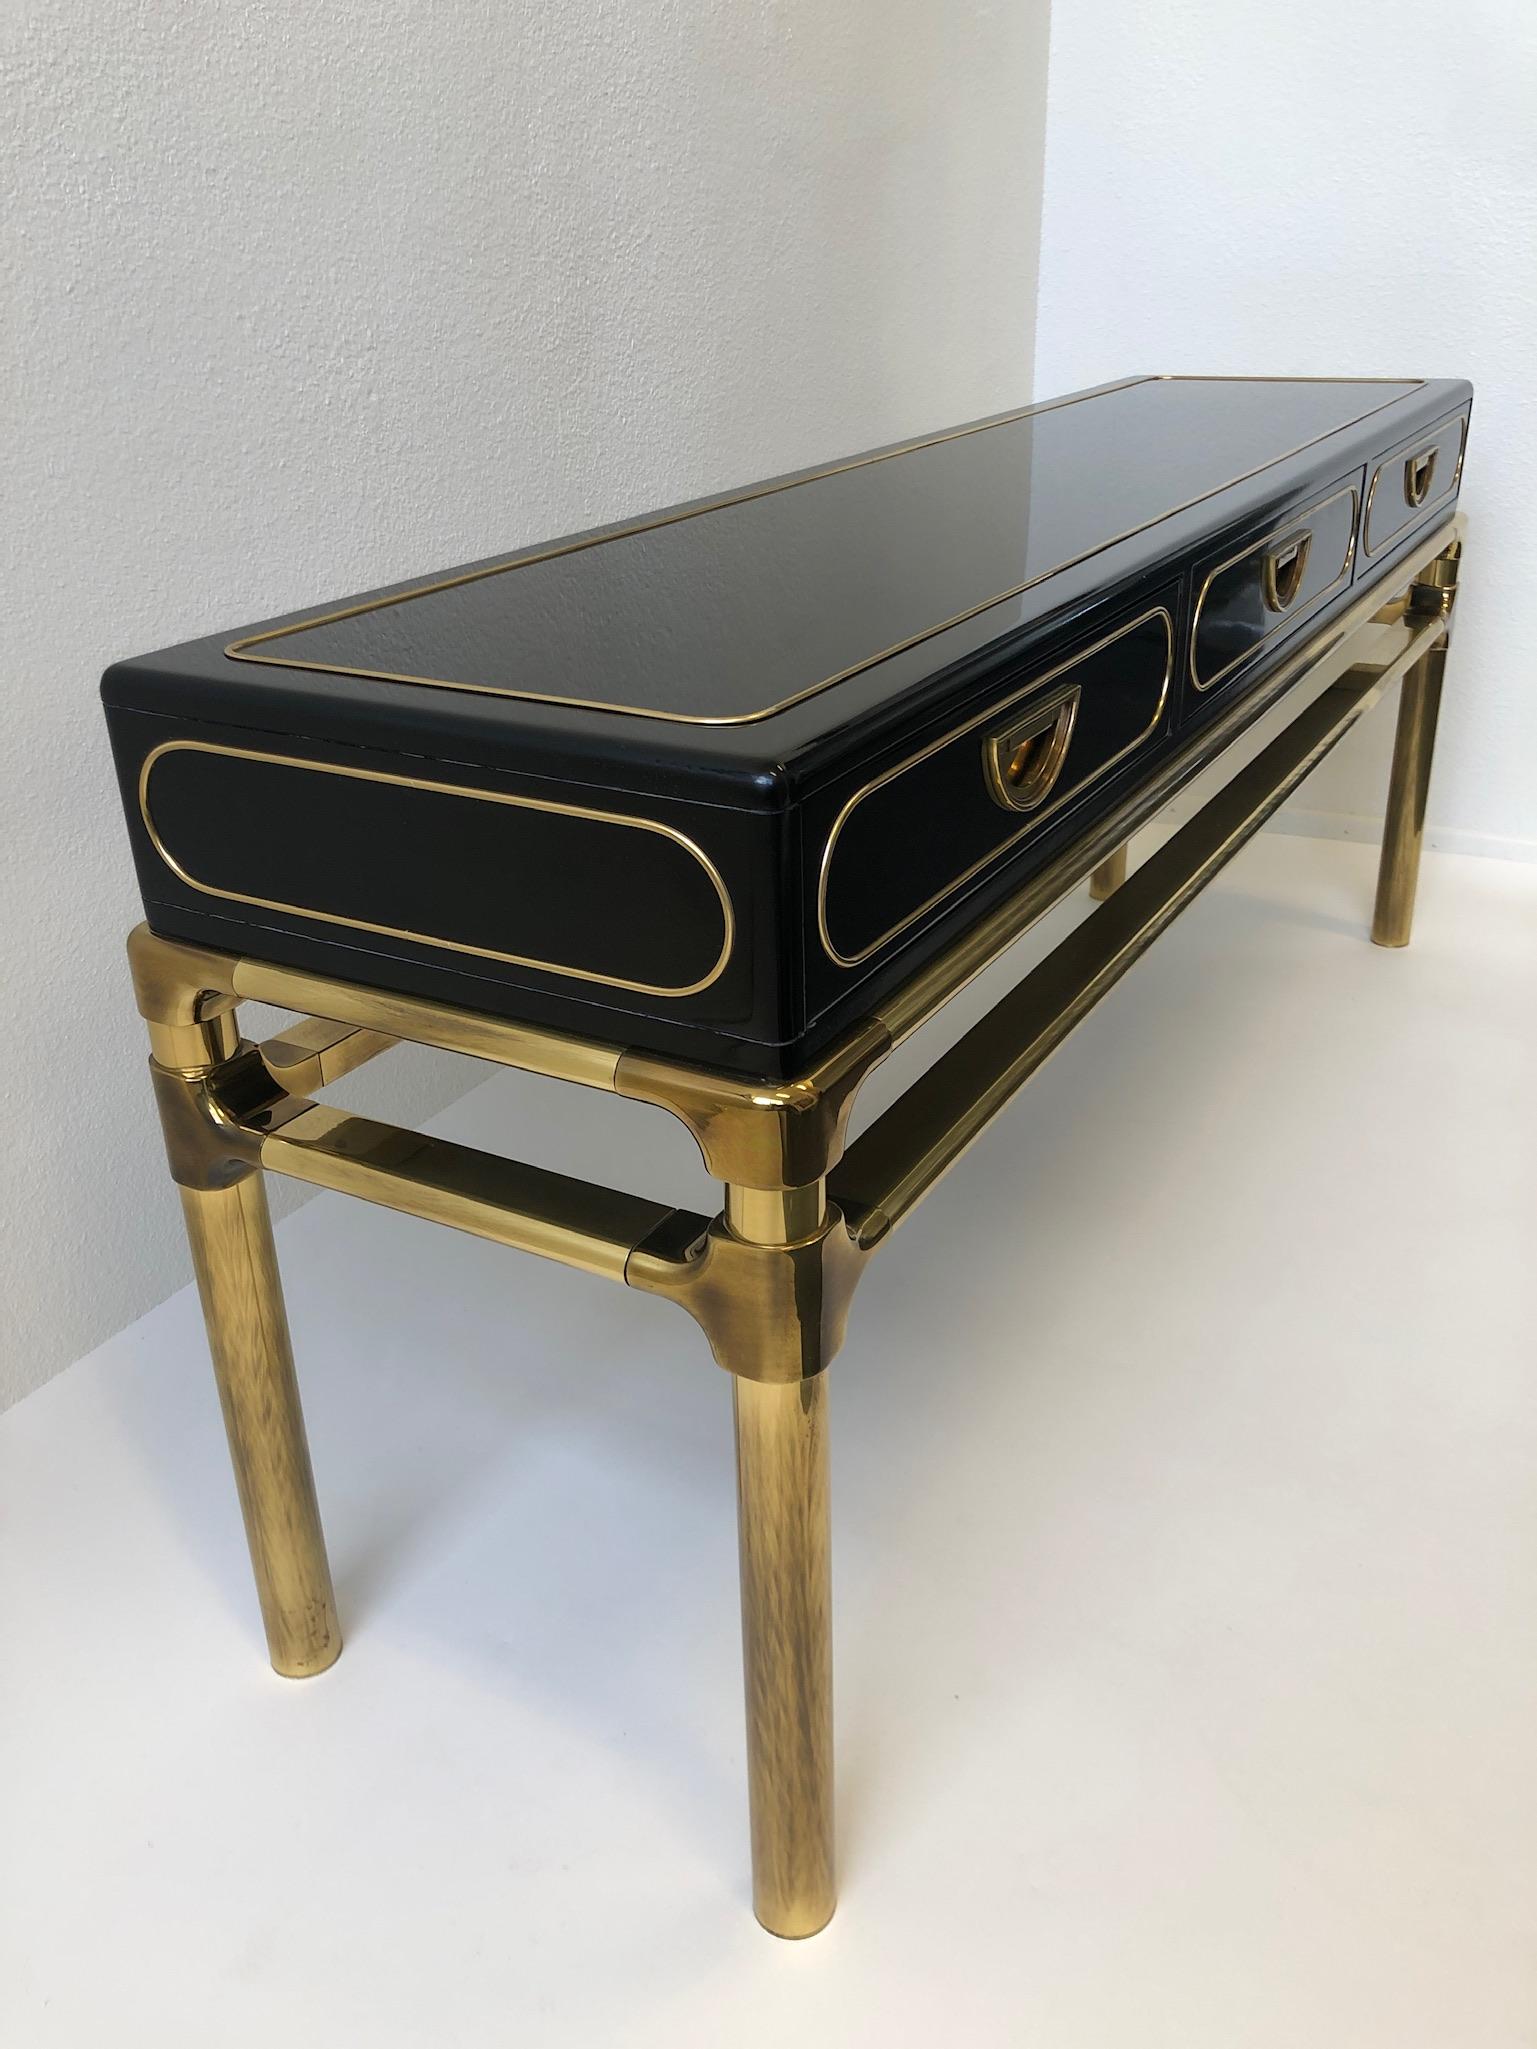 Modern Brass and Black Lacquer Console Table with Drawers by Mastercraft